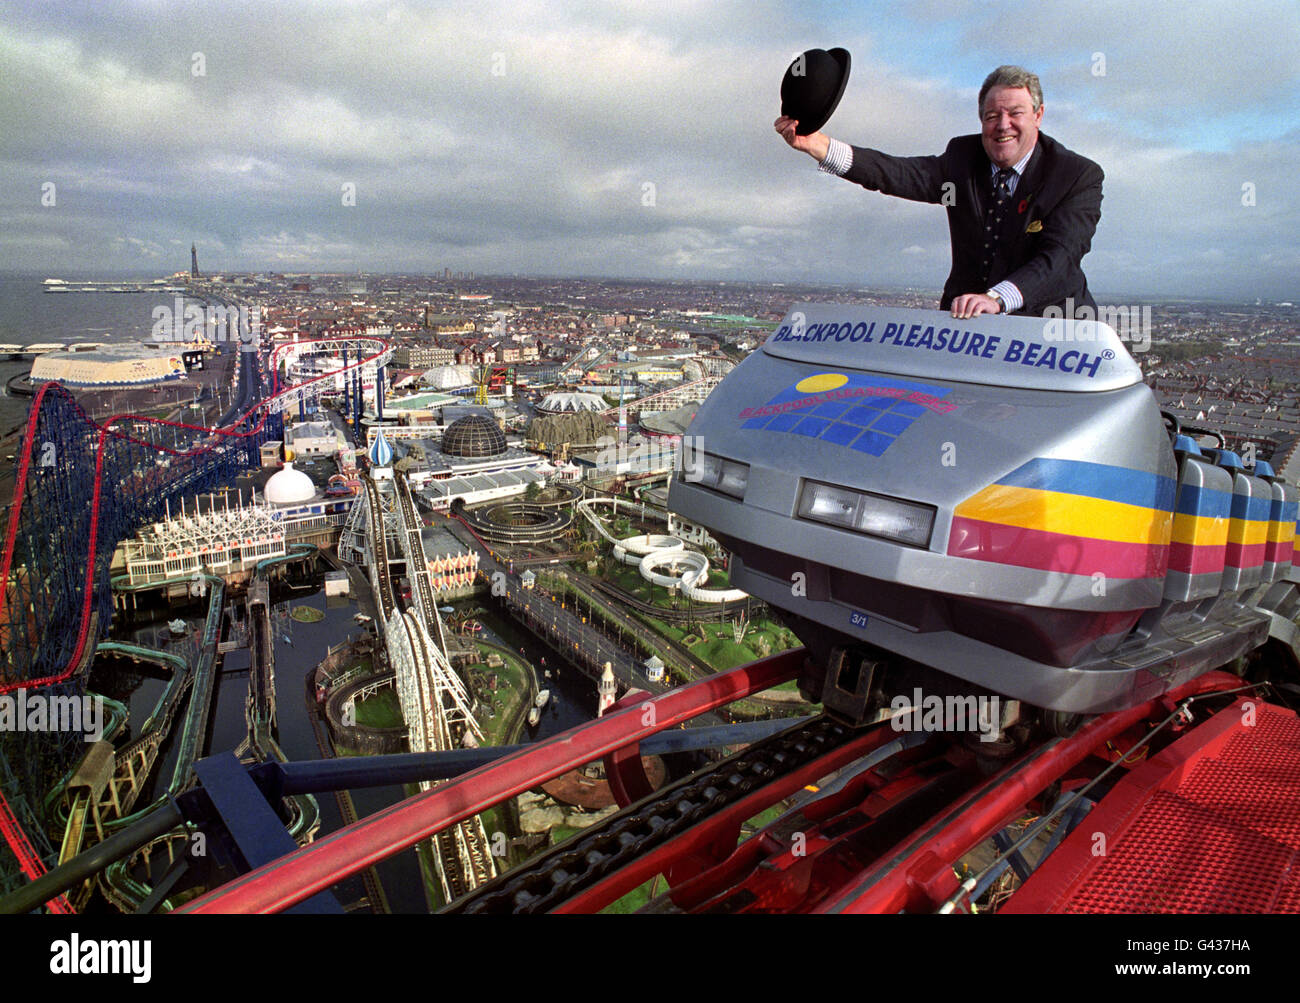 On top of the World, Geoffrey Thompson, the MD of Blackpool Pleasure Beach on the Big One ride, who will become the first ever British President of the International Association of Amusement Parks in the 77 years since the Association's formation. Stock Photo